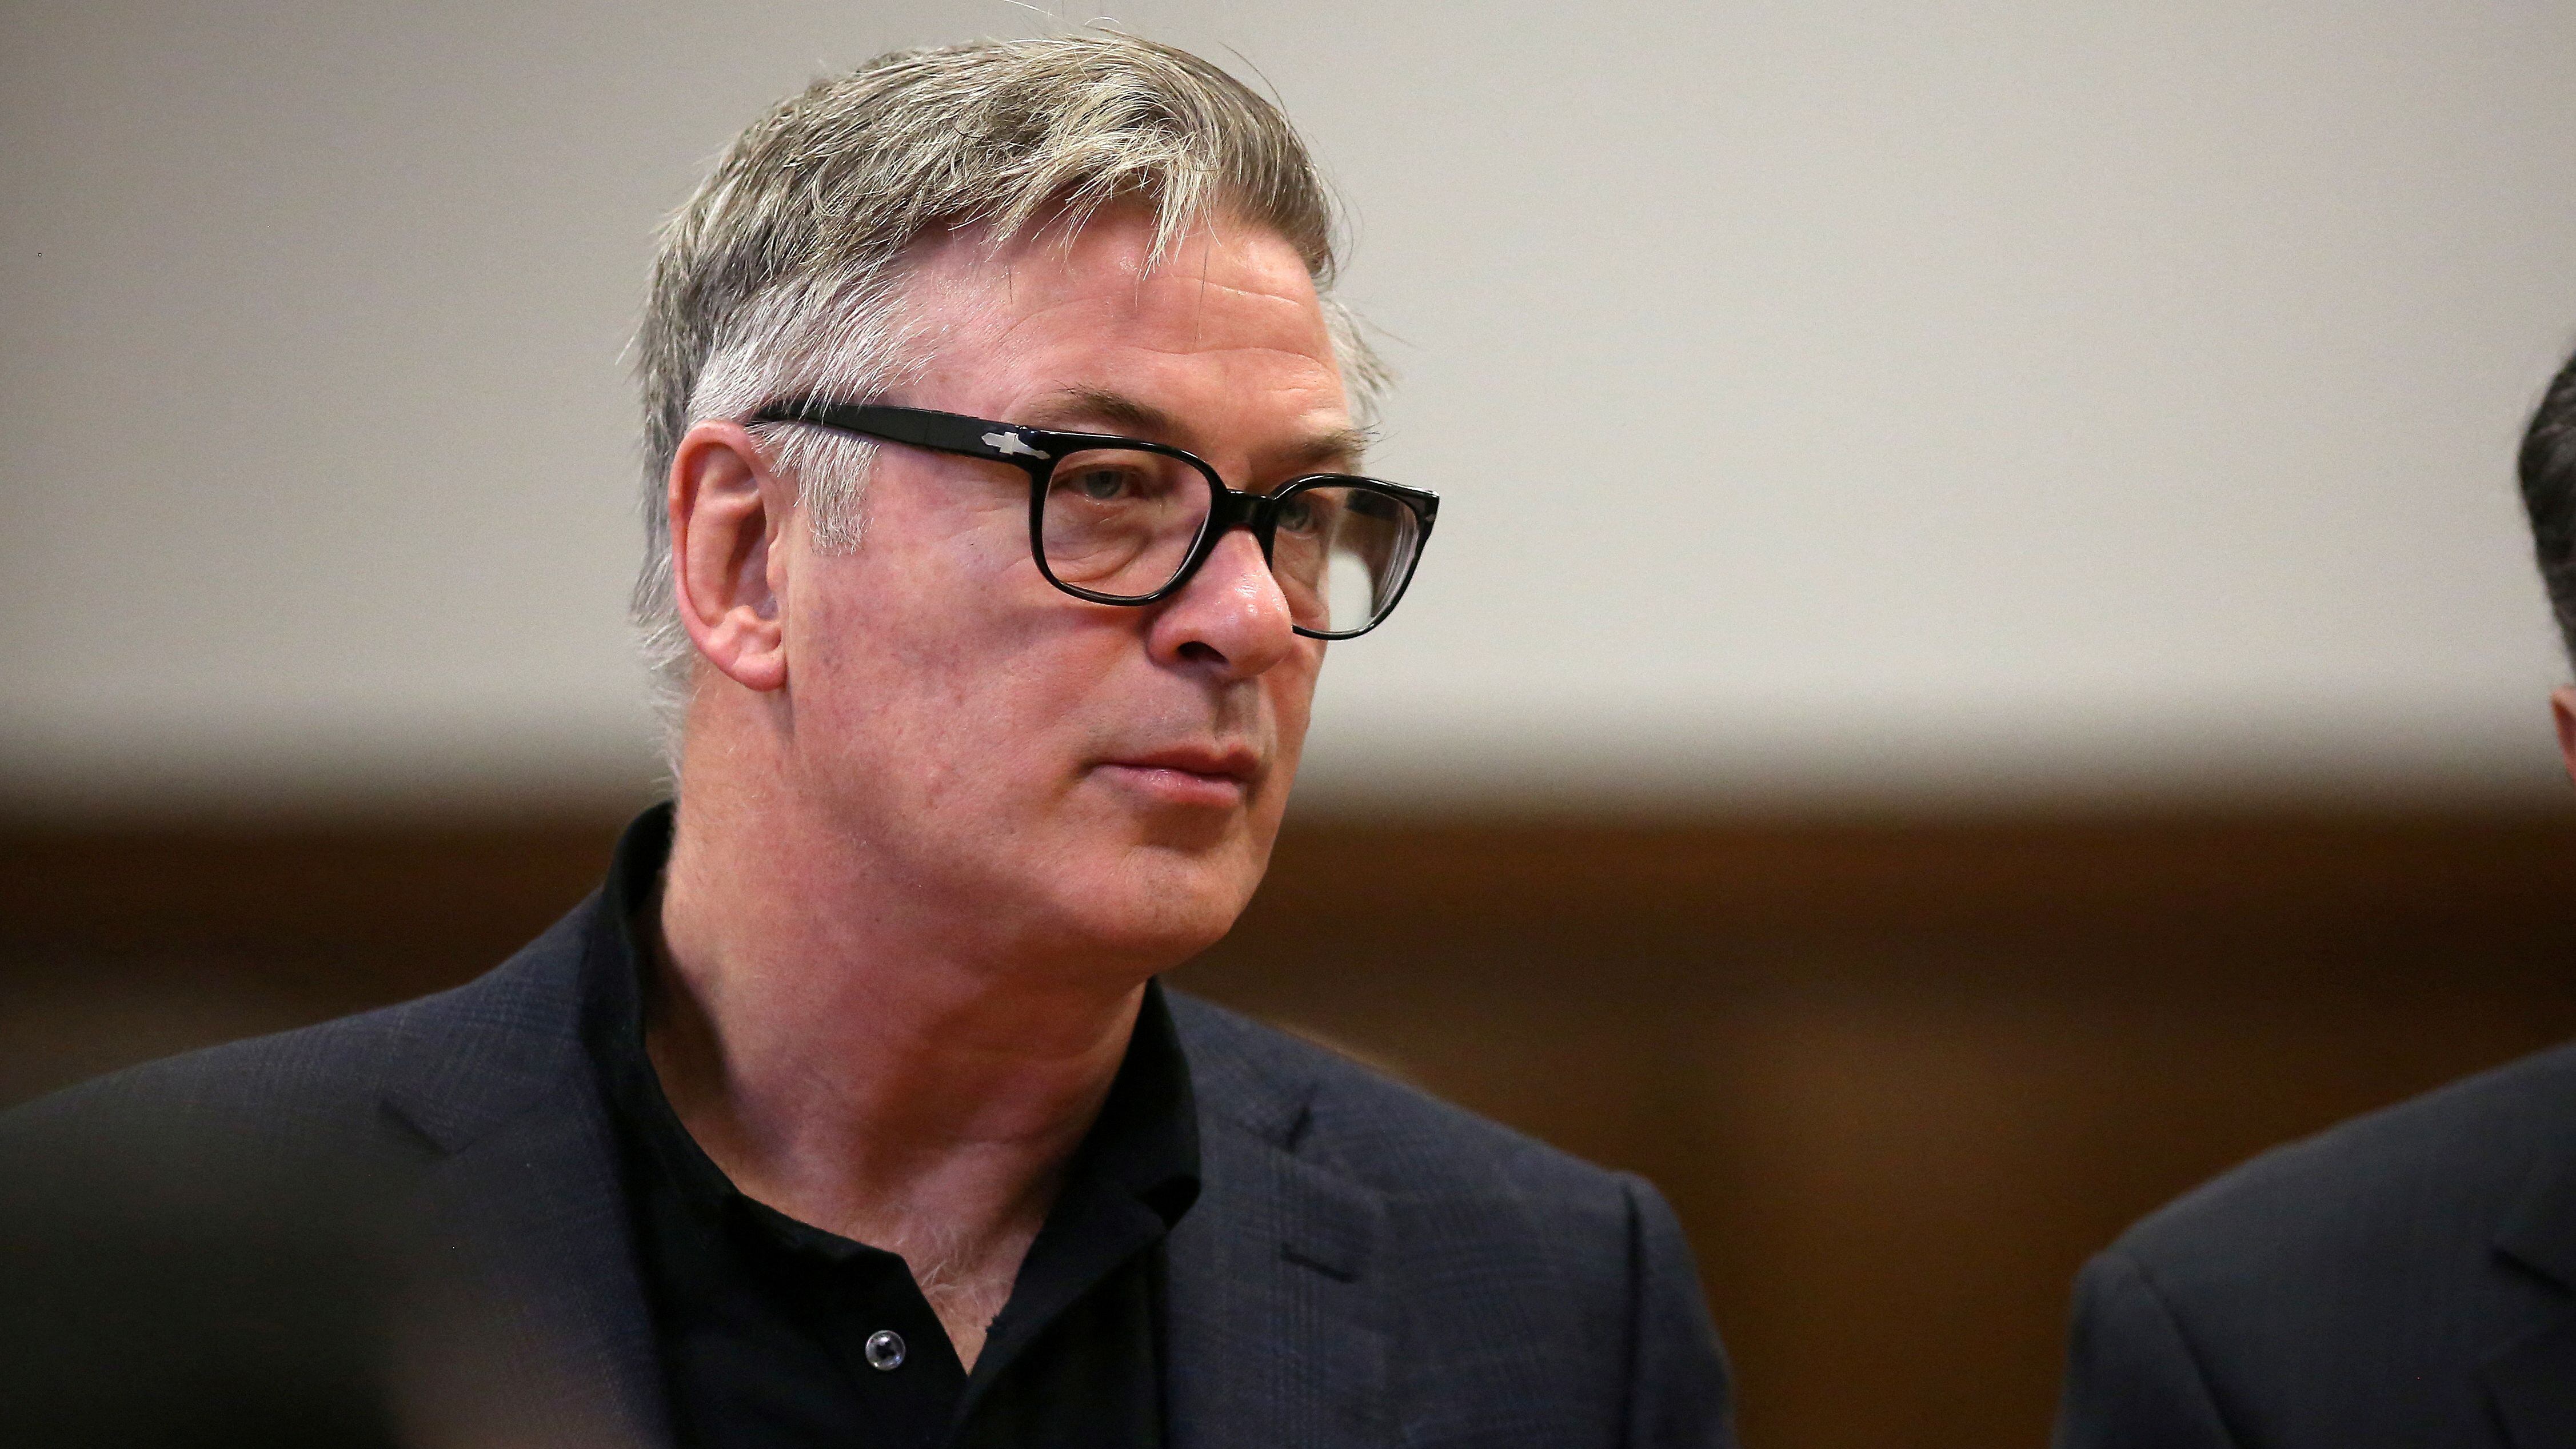 FILE PHOTO: Actor Alec Baldwin appears in court in the Manhattan borough of New York City, New York, U.S., January 23, 2019. Alex Tabak/Pool via REUTERS/File Photo